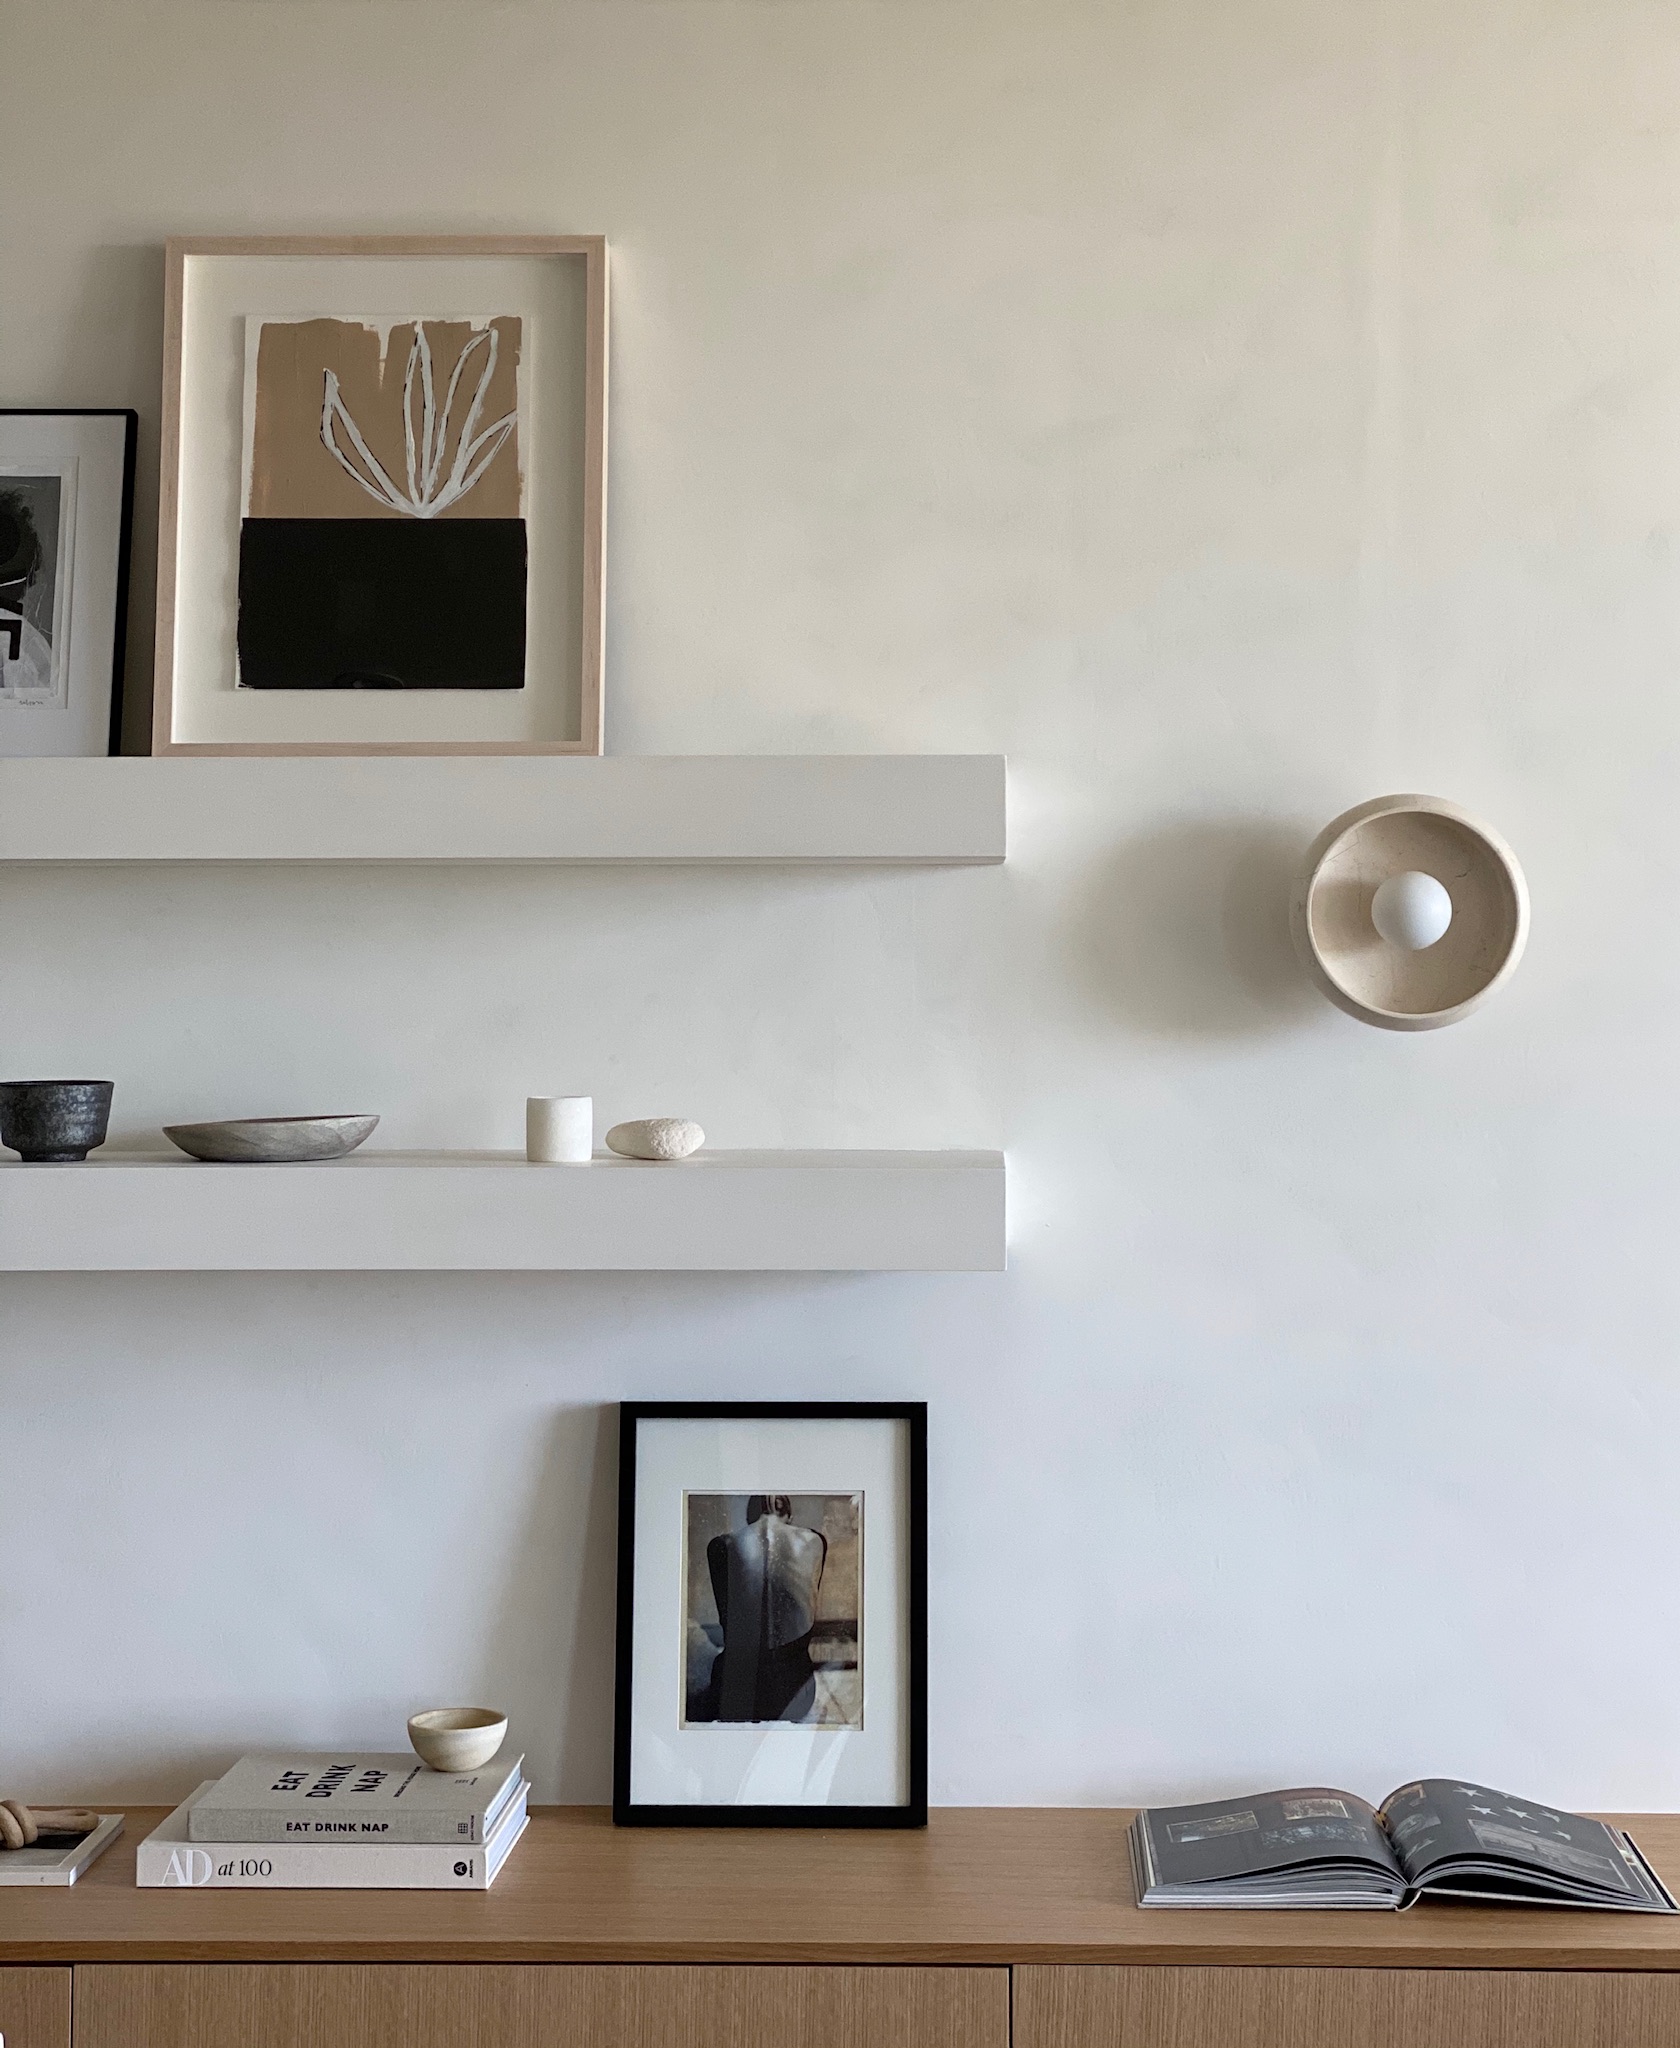 Piedra sconce in a minimalist room designed by the Caza Project